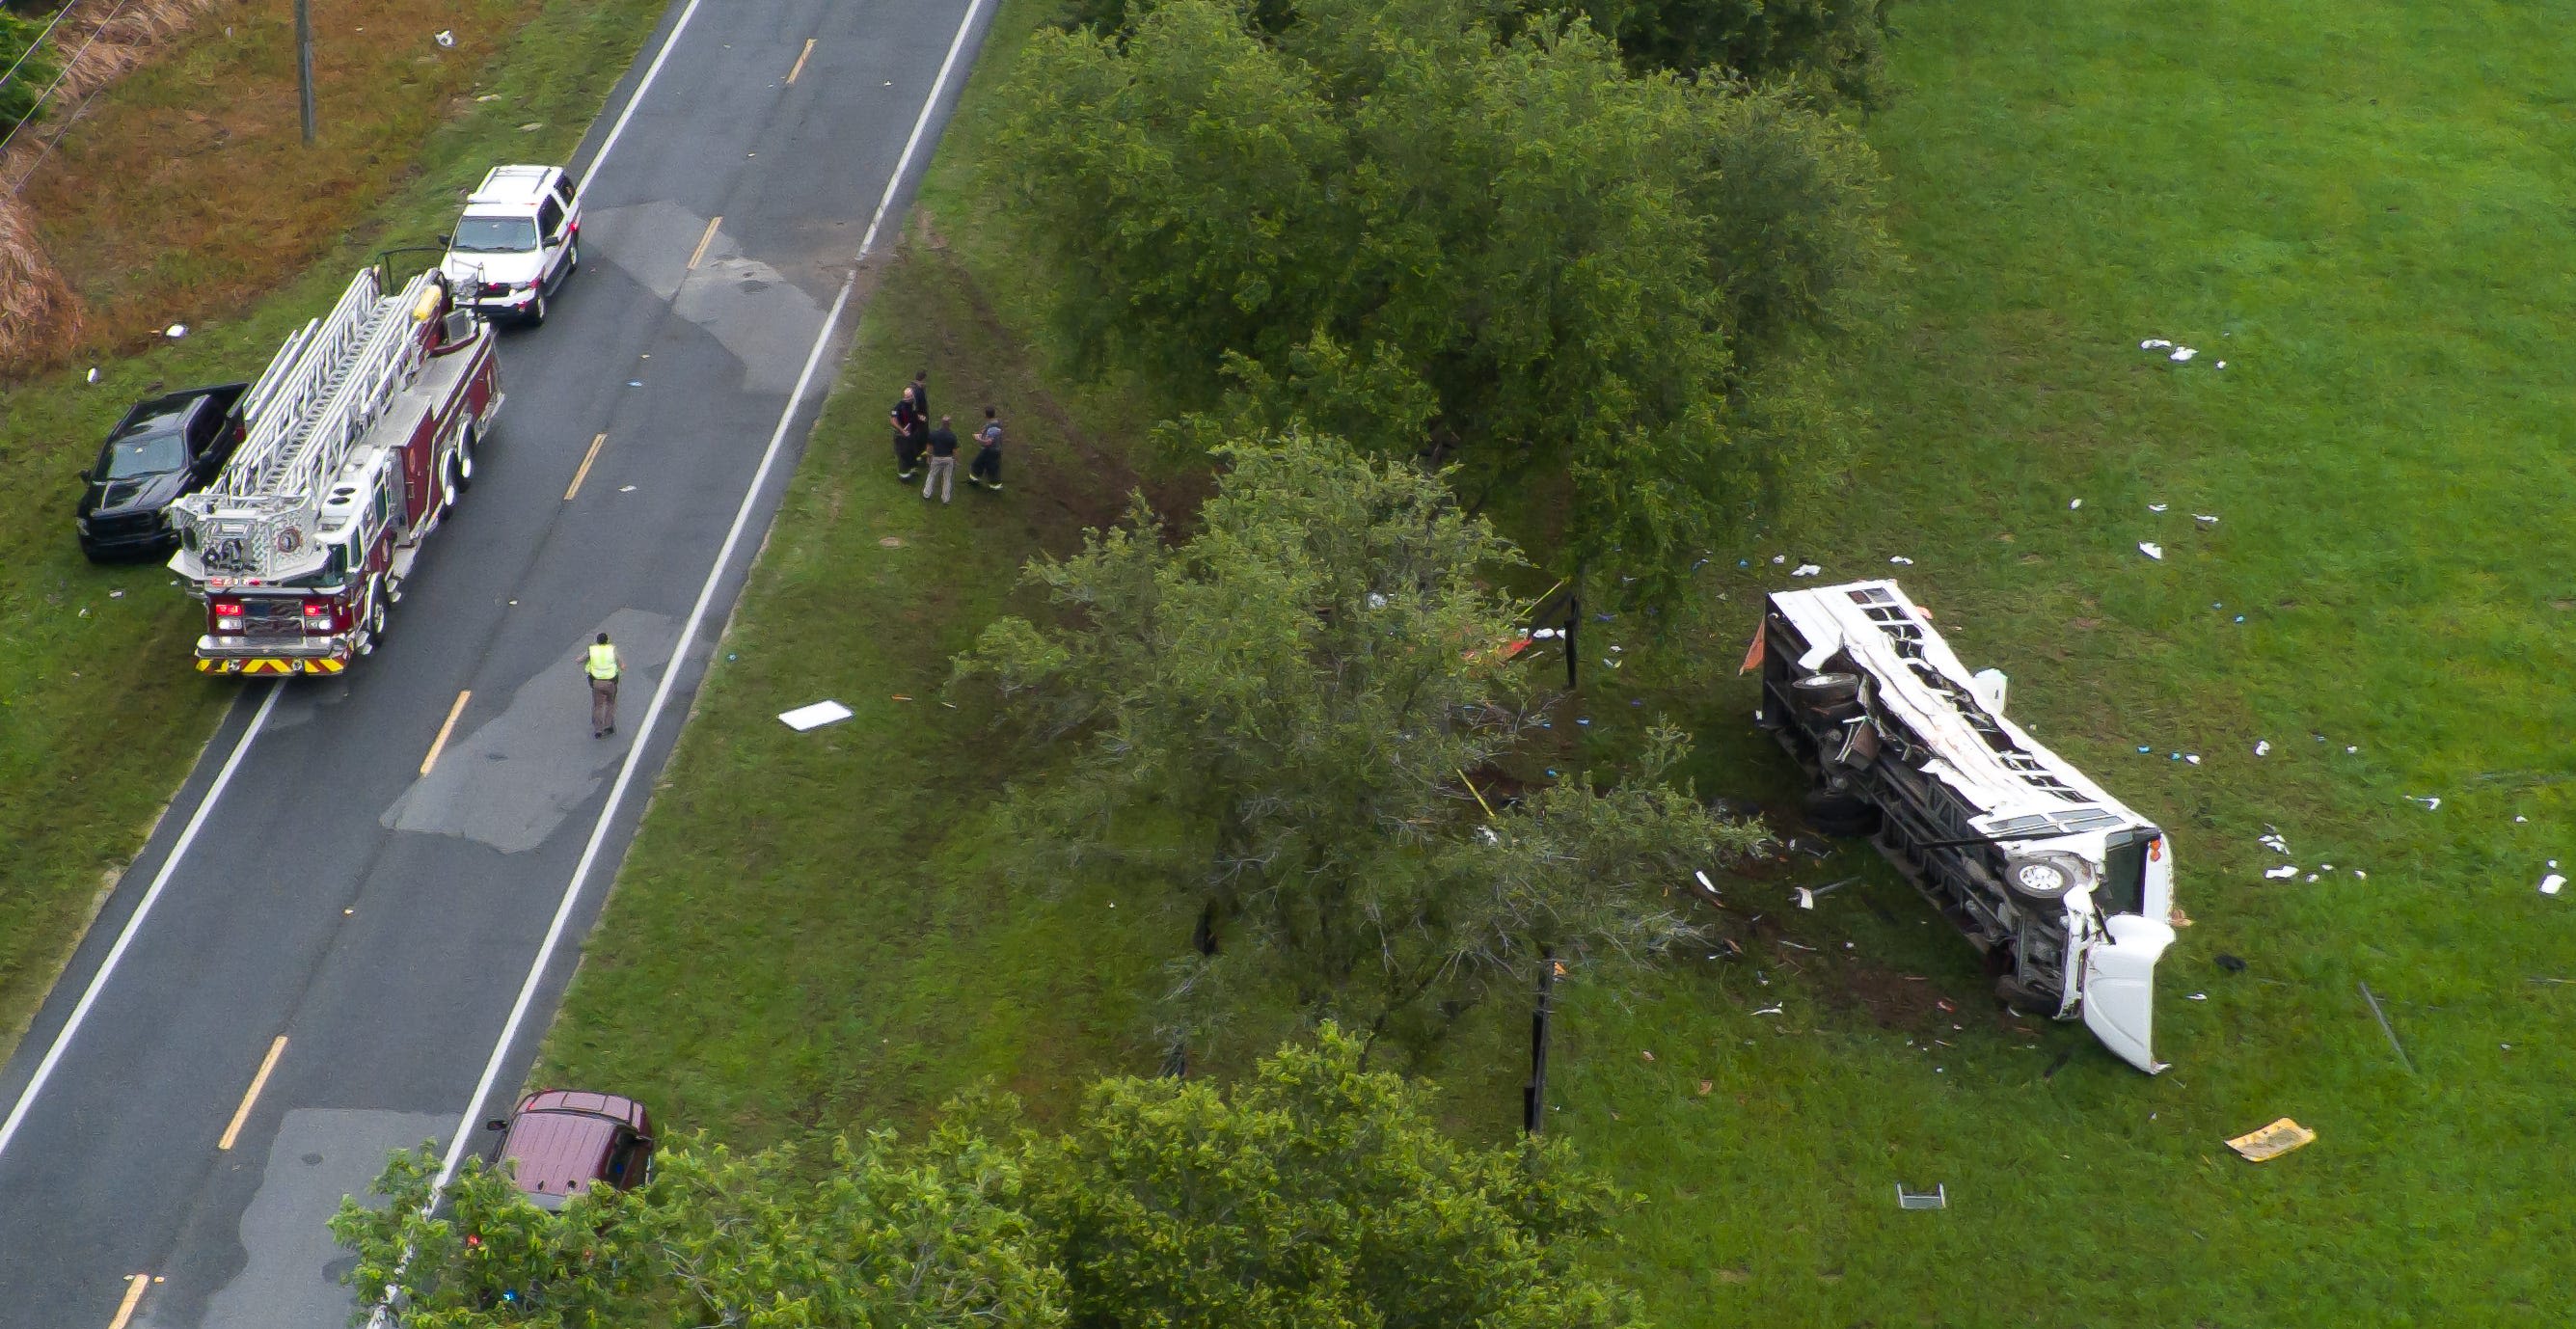 8 farmworkers on bus killed in west Marion crash; other driver charged with DUI-manslaughter